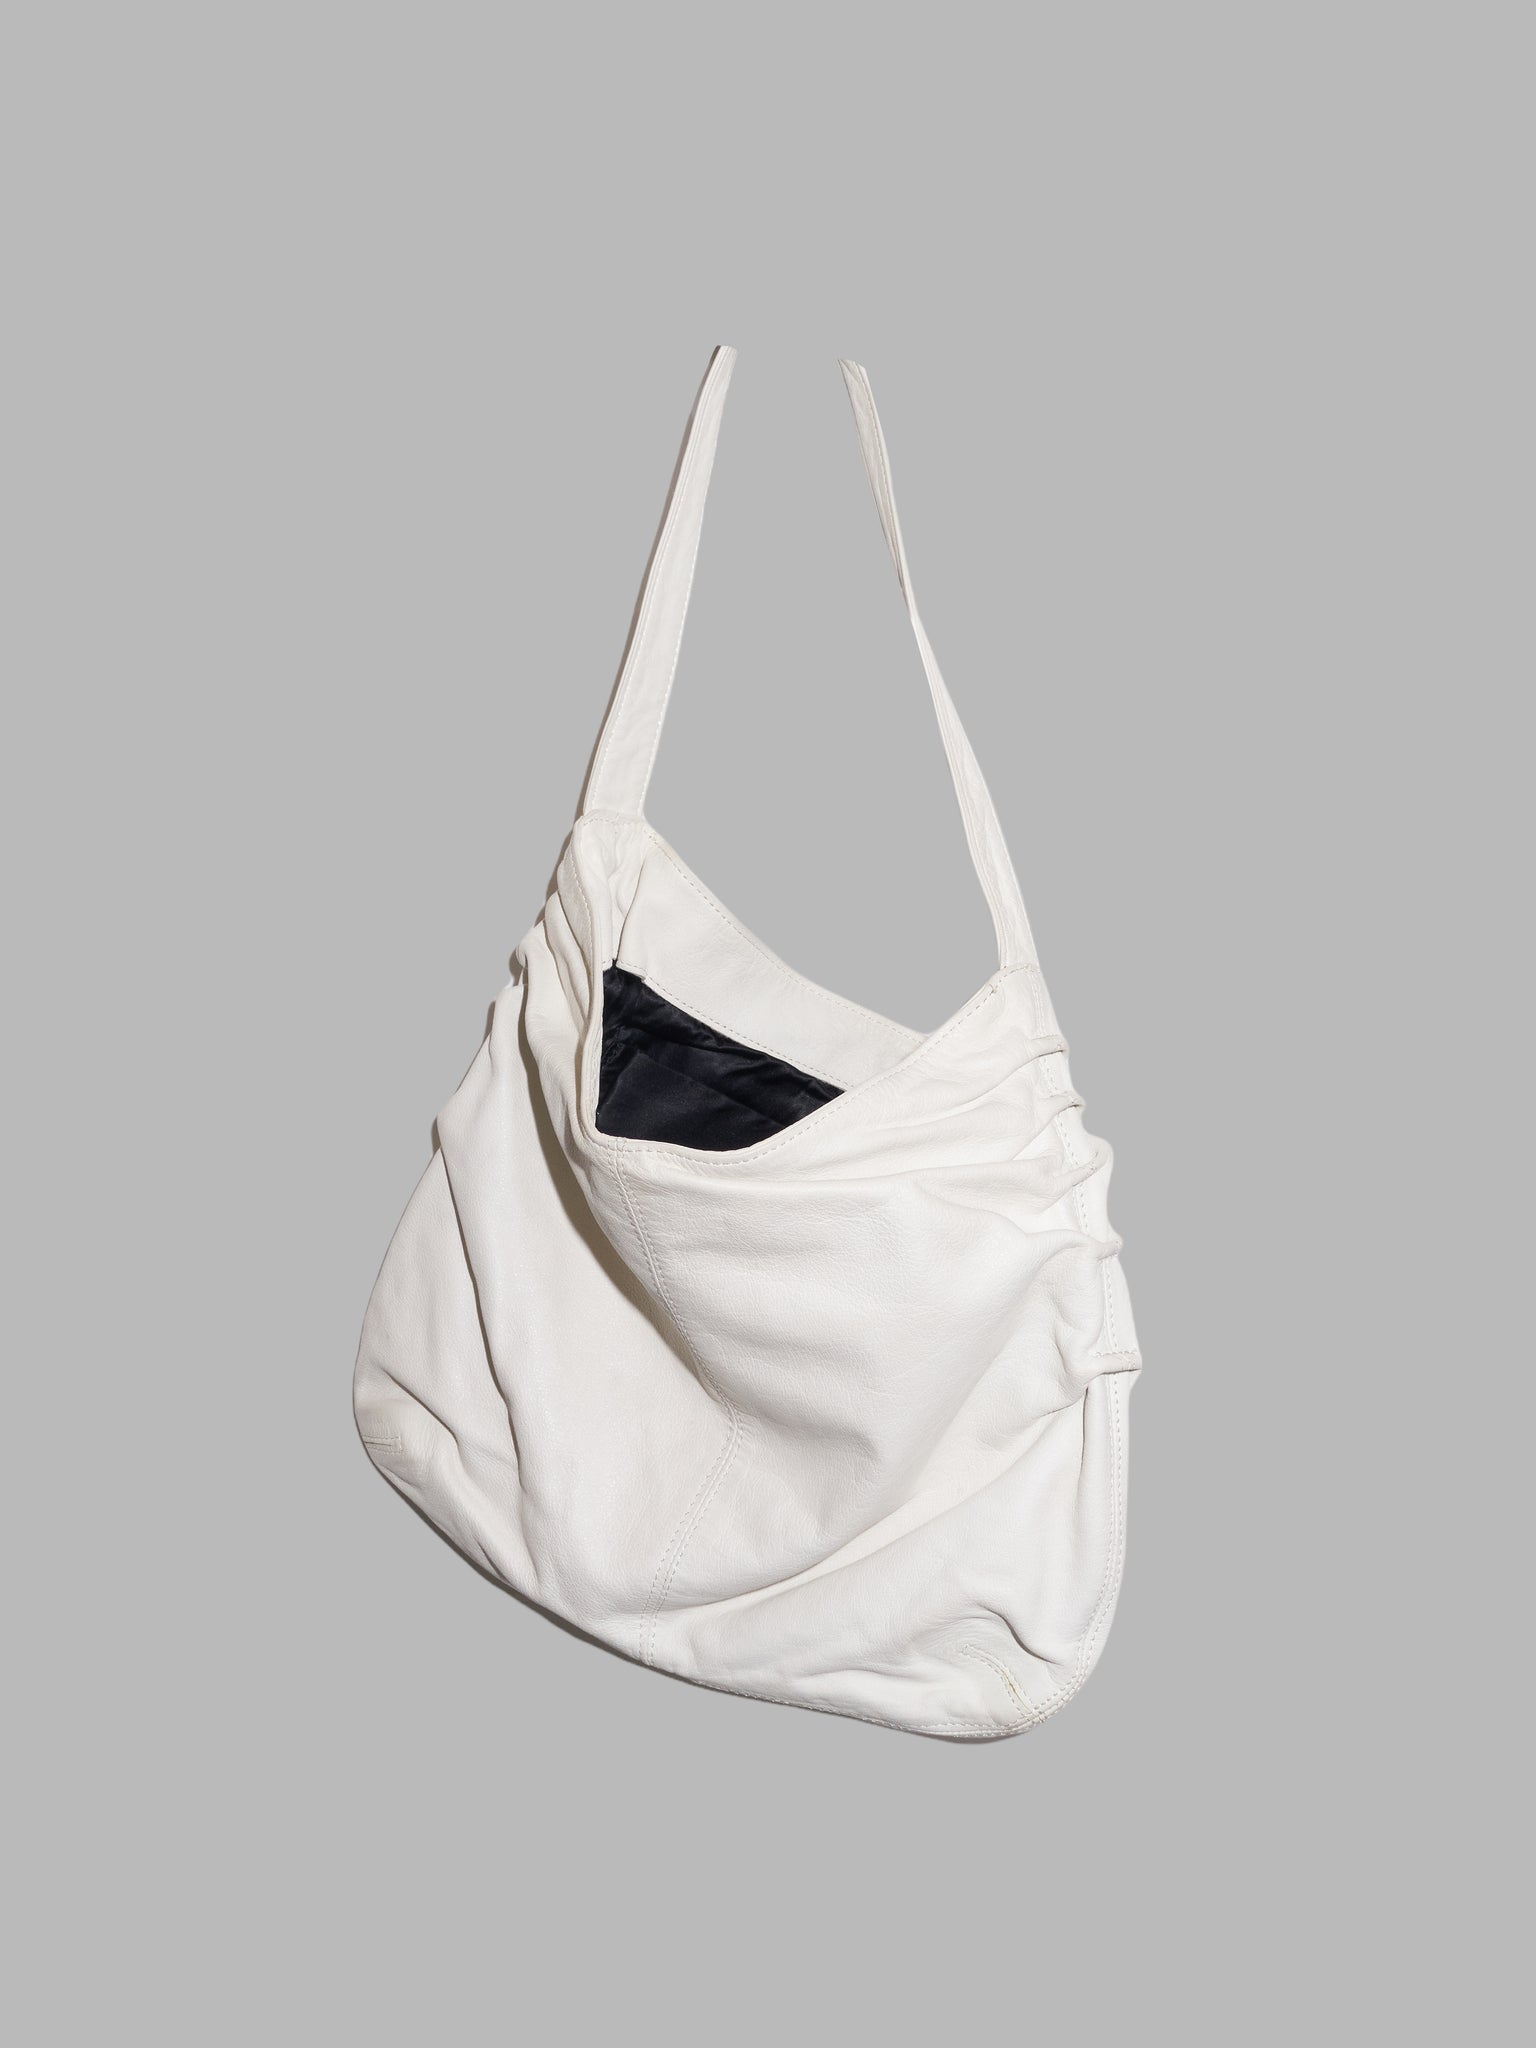 Jean Colonna off white leather shoulder bag with gathered sections